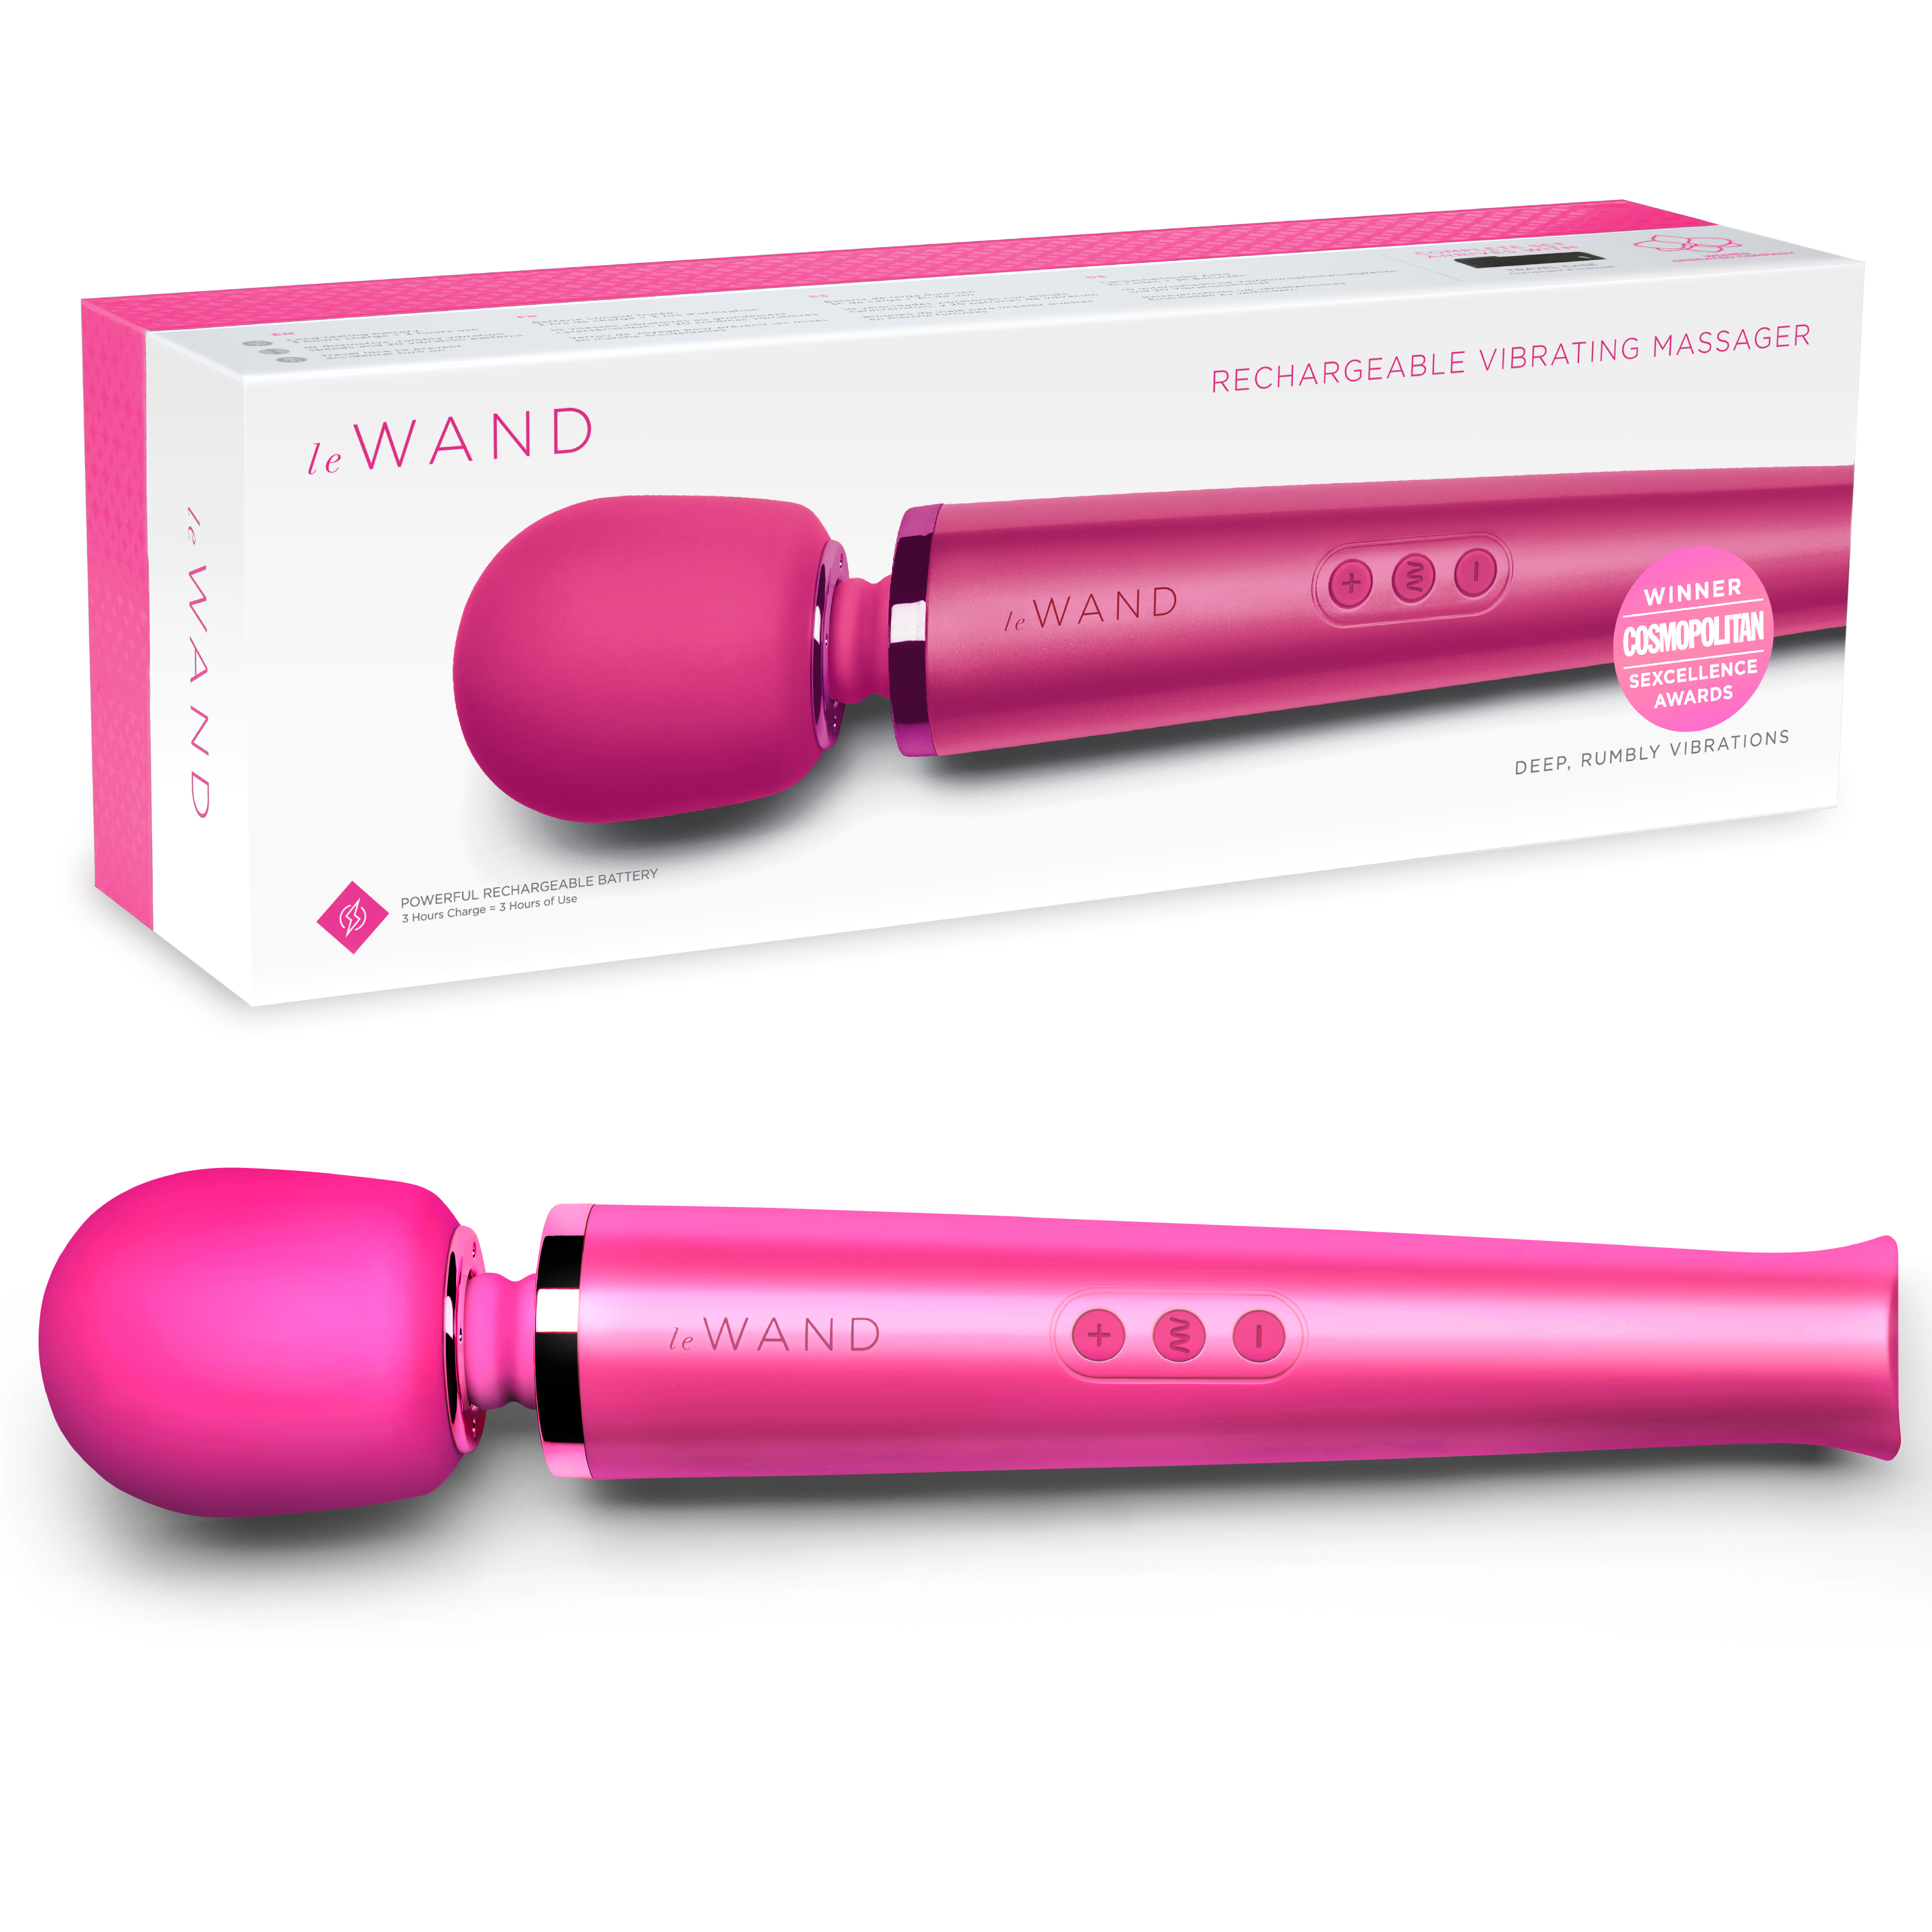 Le Wand Magenta rechargeable massager